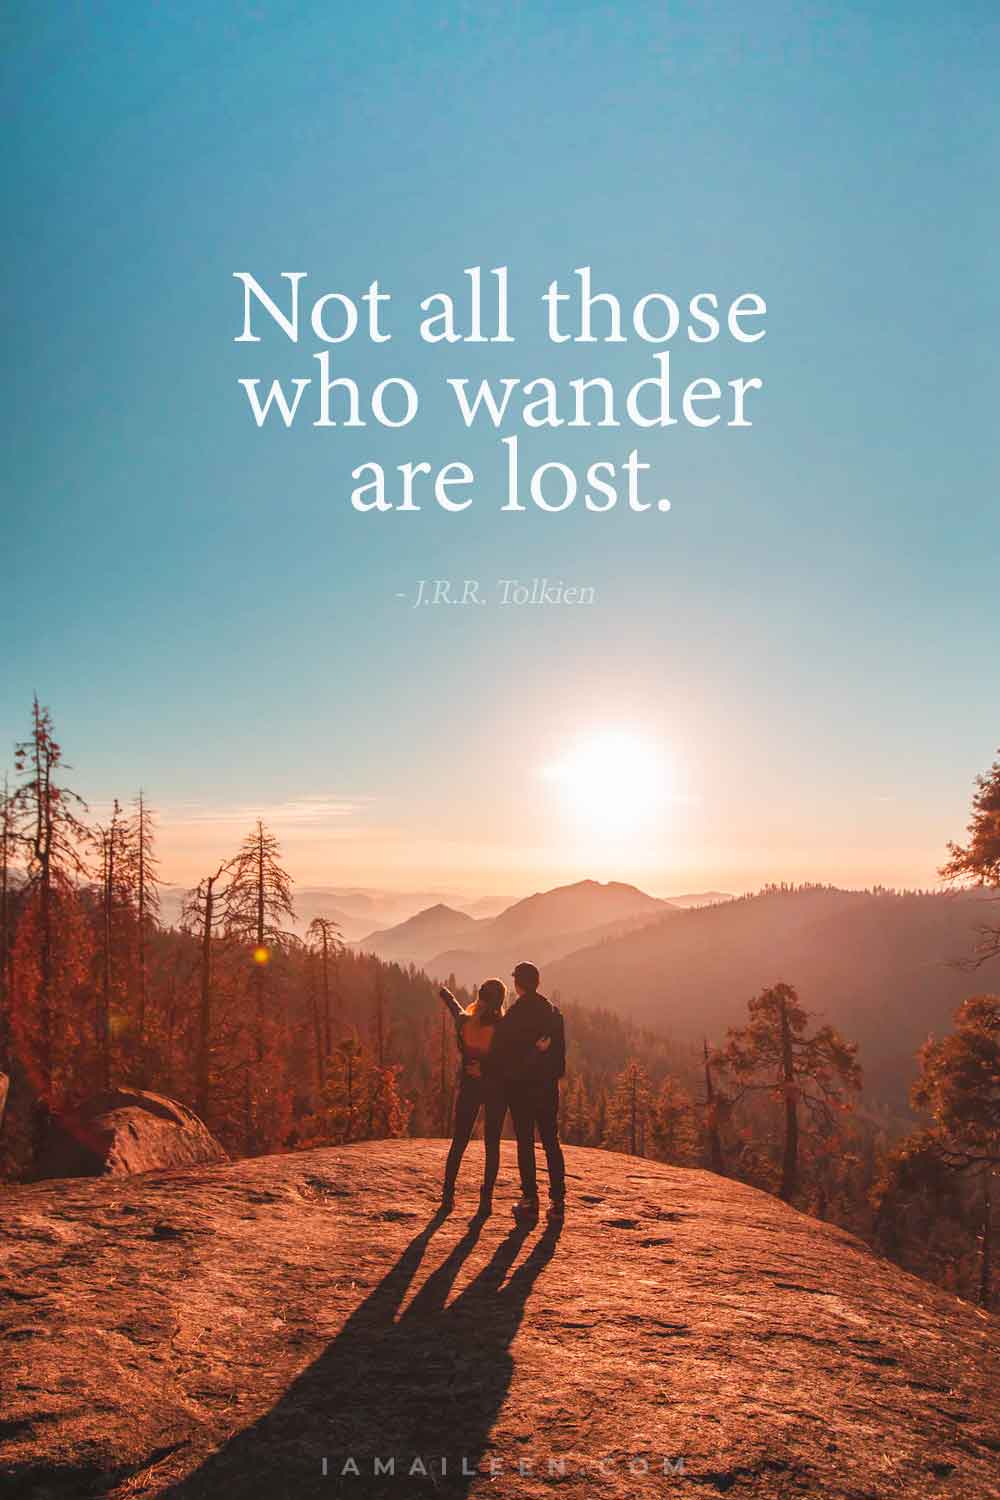 LOTR Saying: Not all those who wander are lost